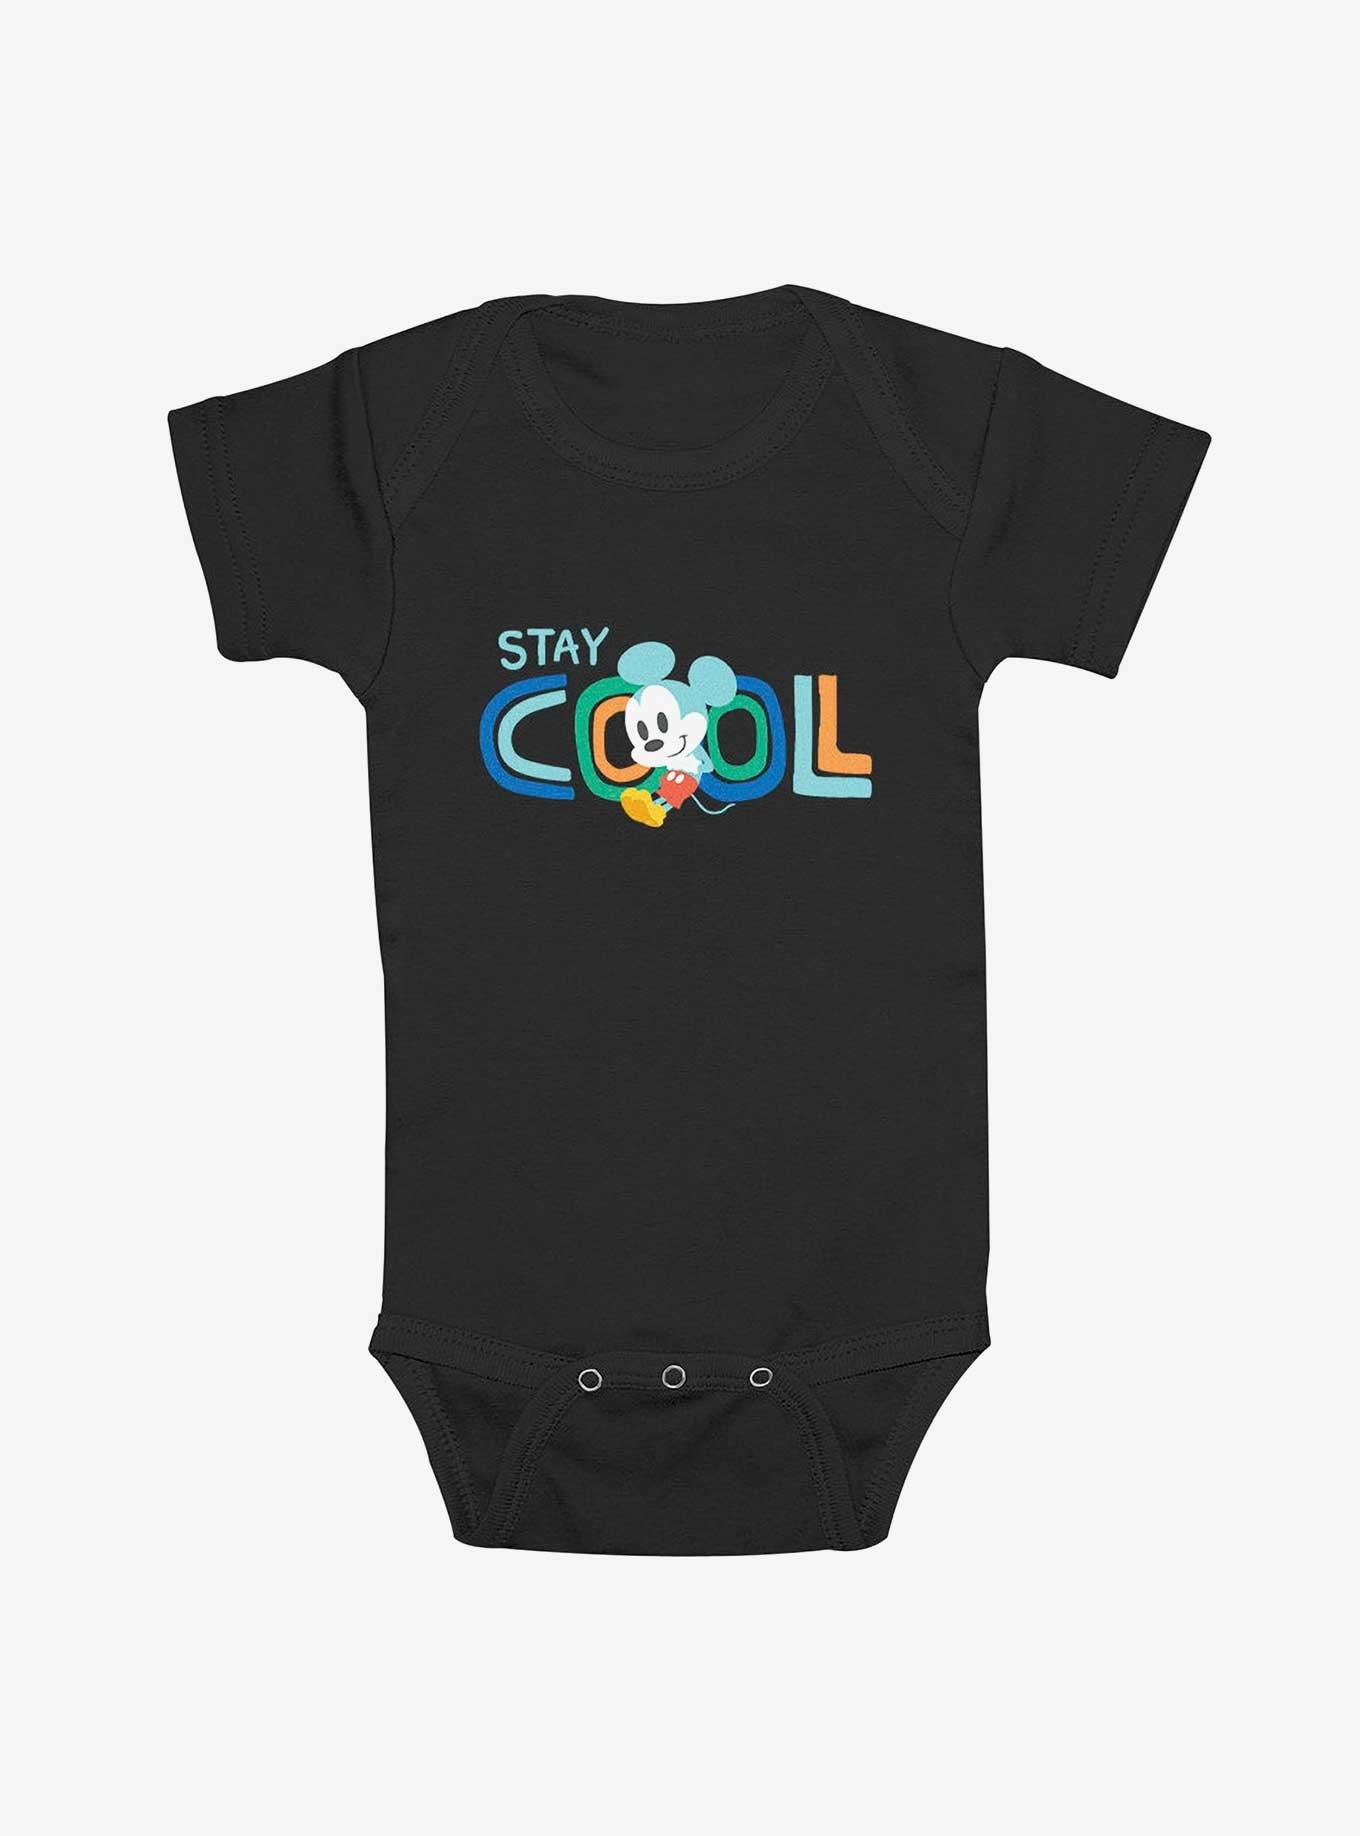 Disney Mickey Mouse Stay Cool Infant Bodysuit, BLACK, hi-res